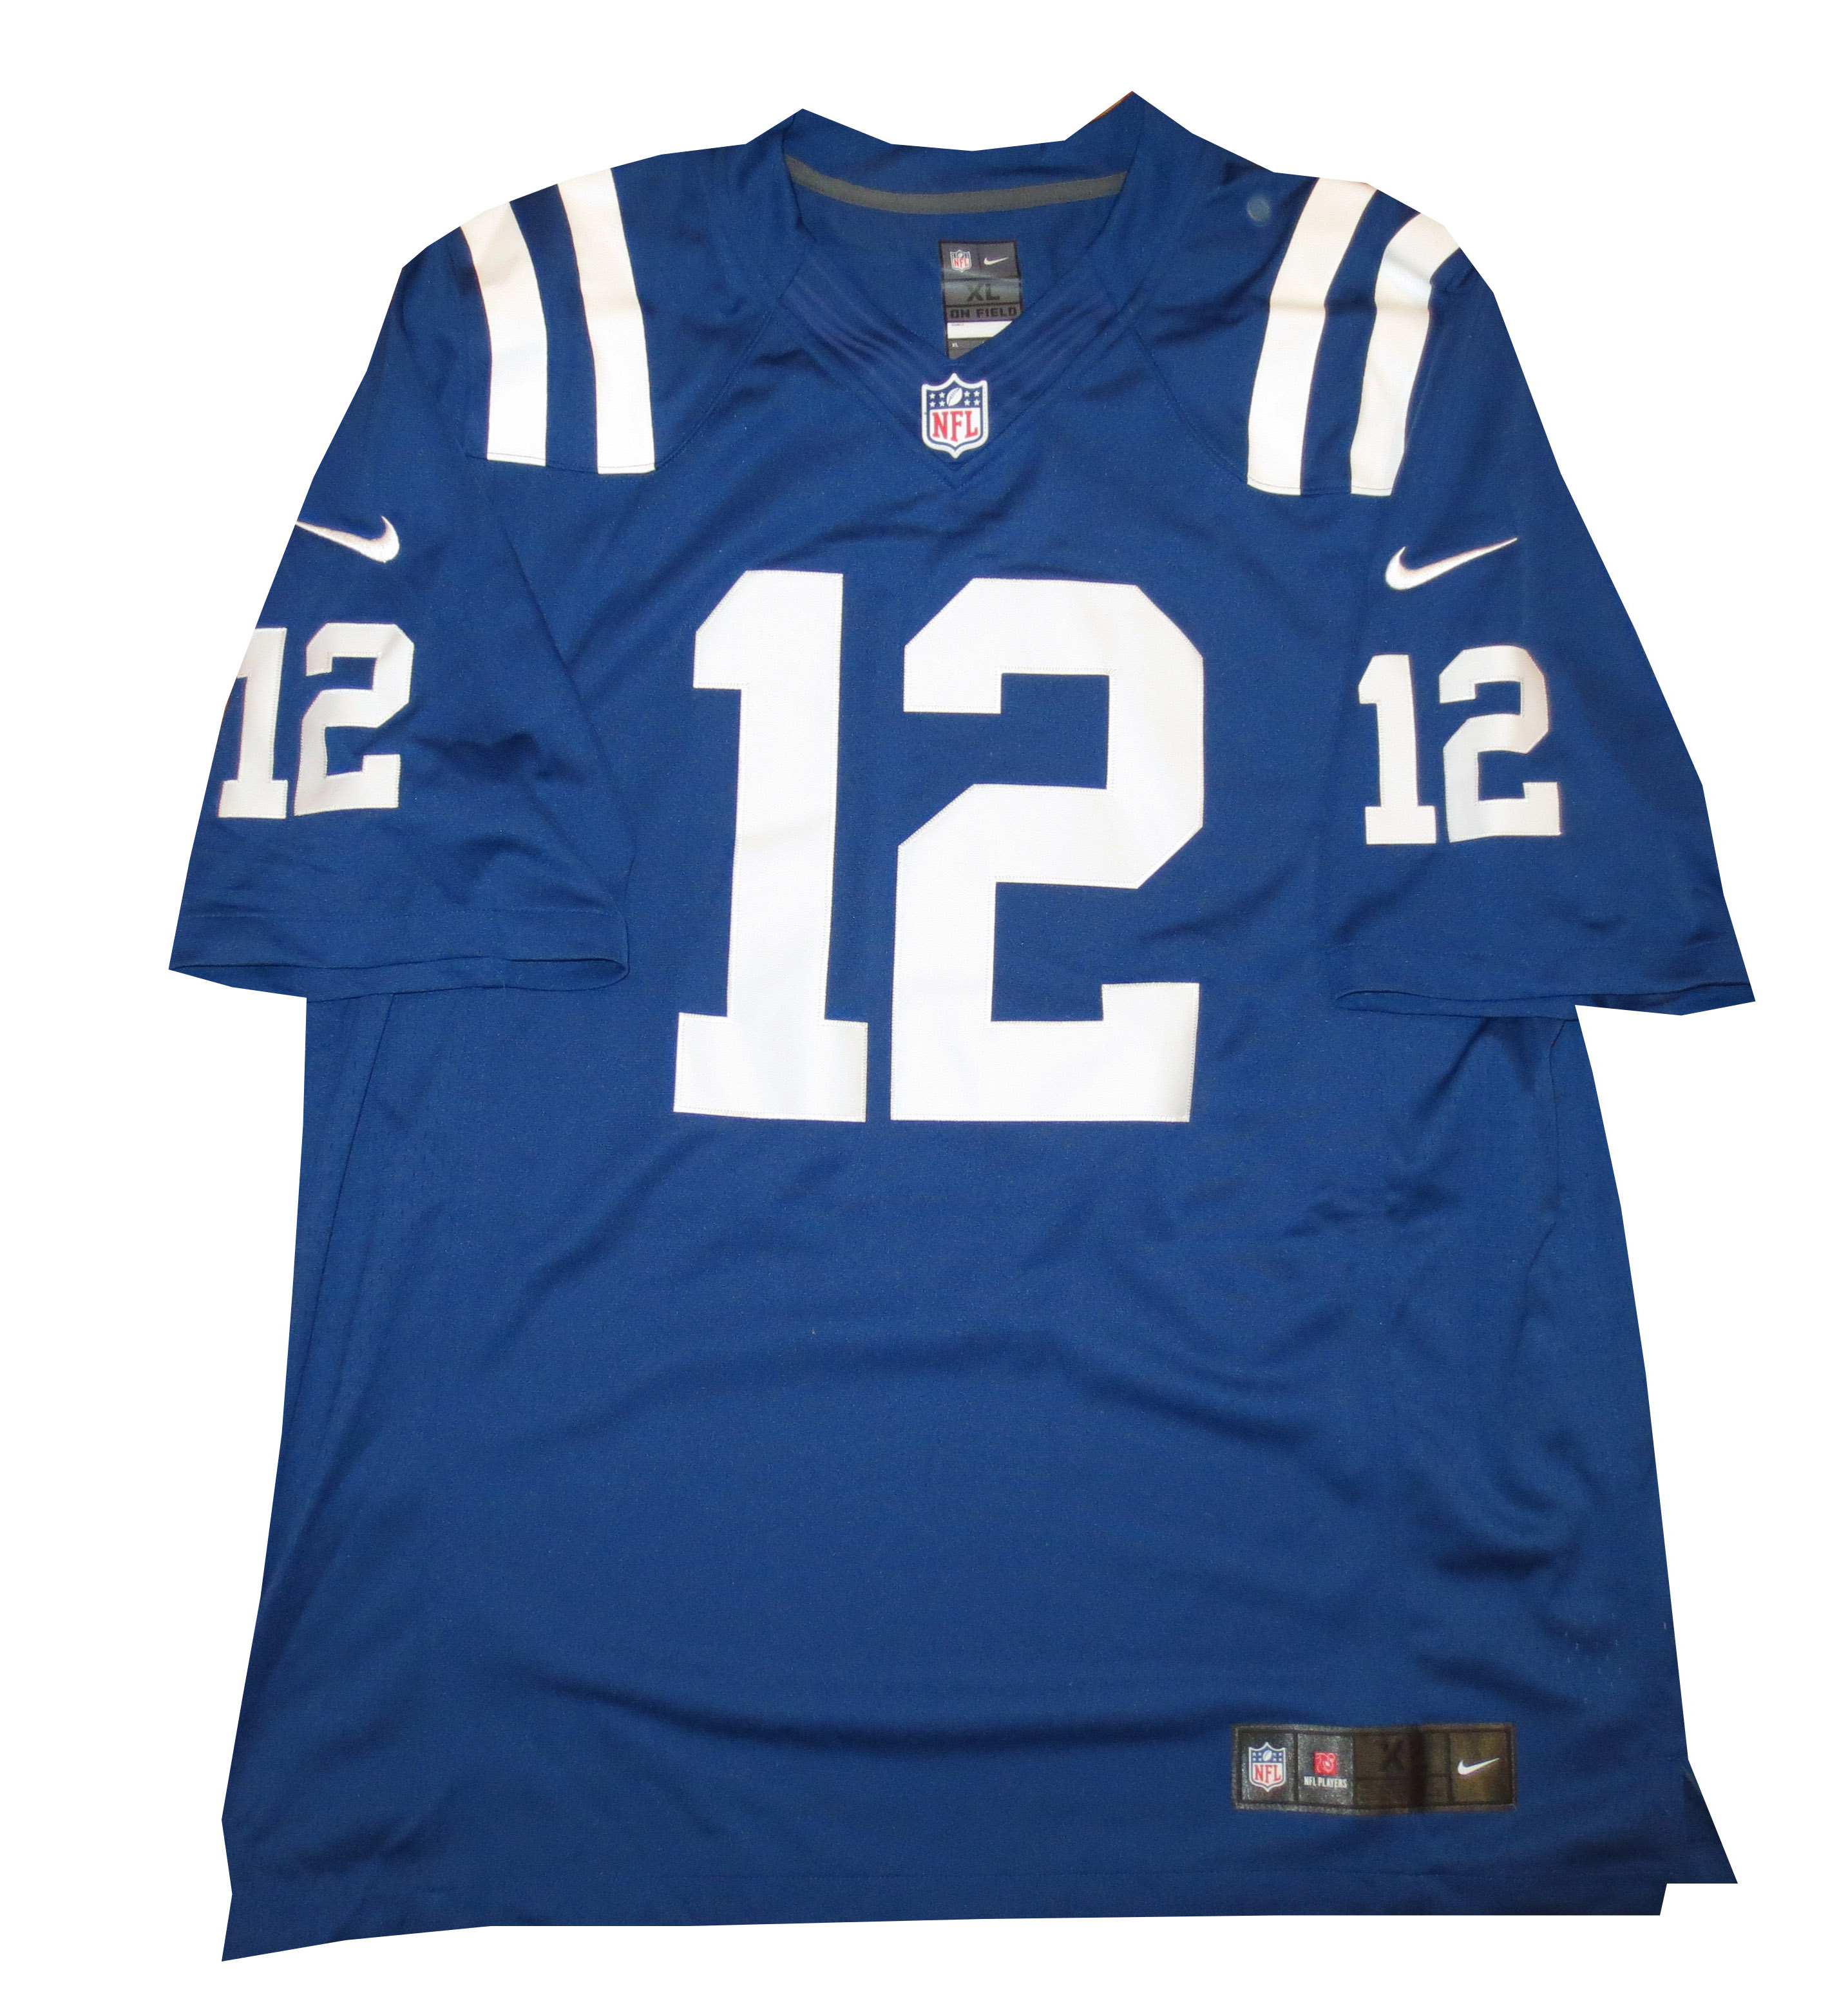 andrew luck signed jersey